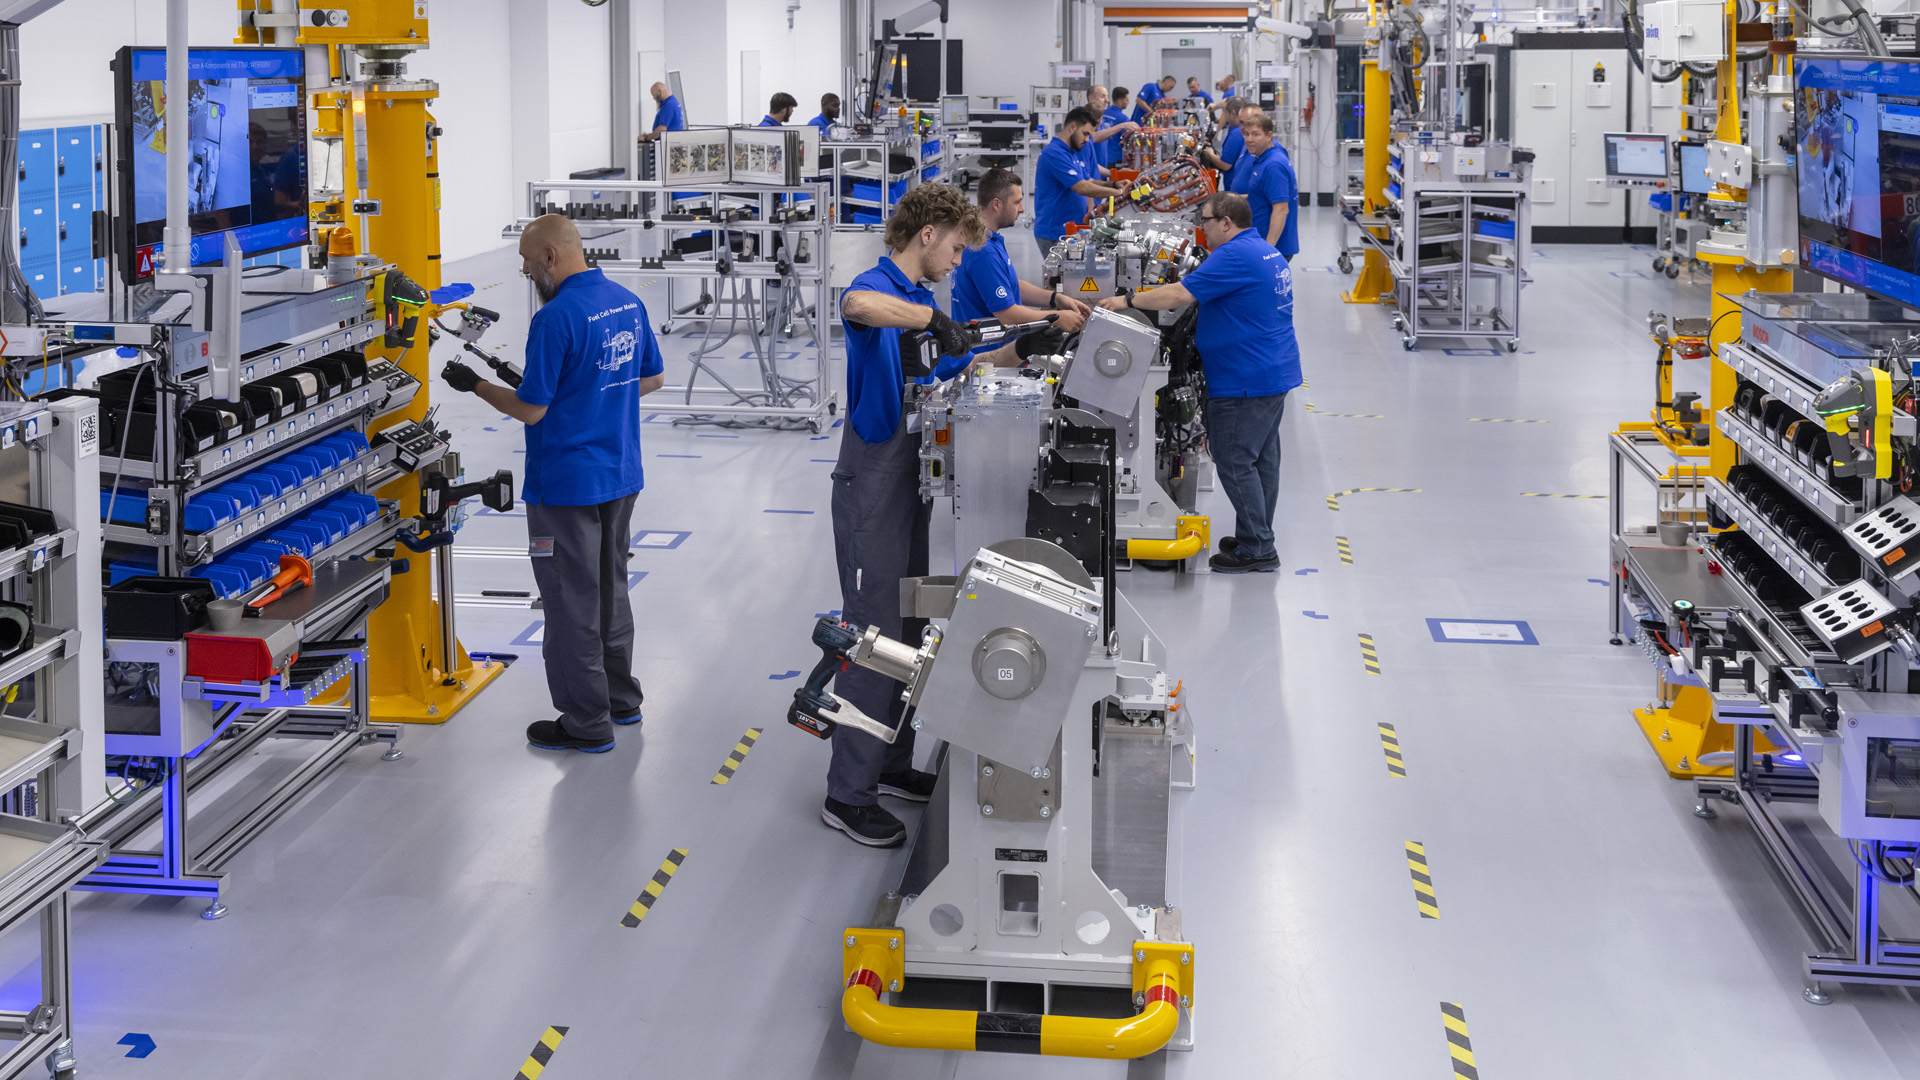 Overview: Manufacturing of Fuel Cell Power Module (FCPM) in the Feuerbach plant